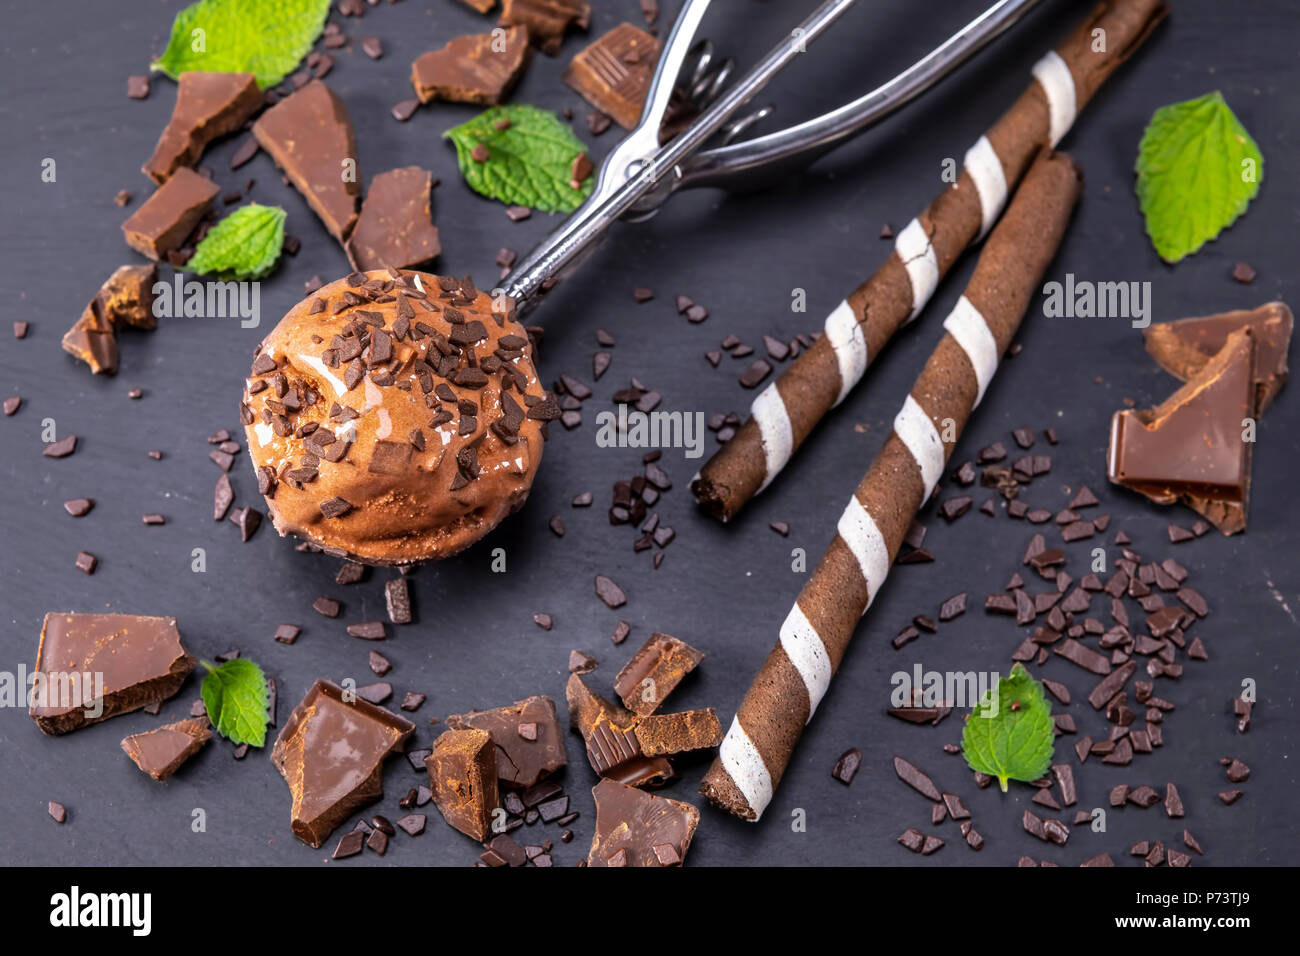 Chocolate ice cream in scoop with wafer sticks and chocolate on a black slate board. Focus on ice cream in scoop. Stock Photo